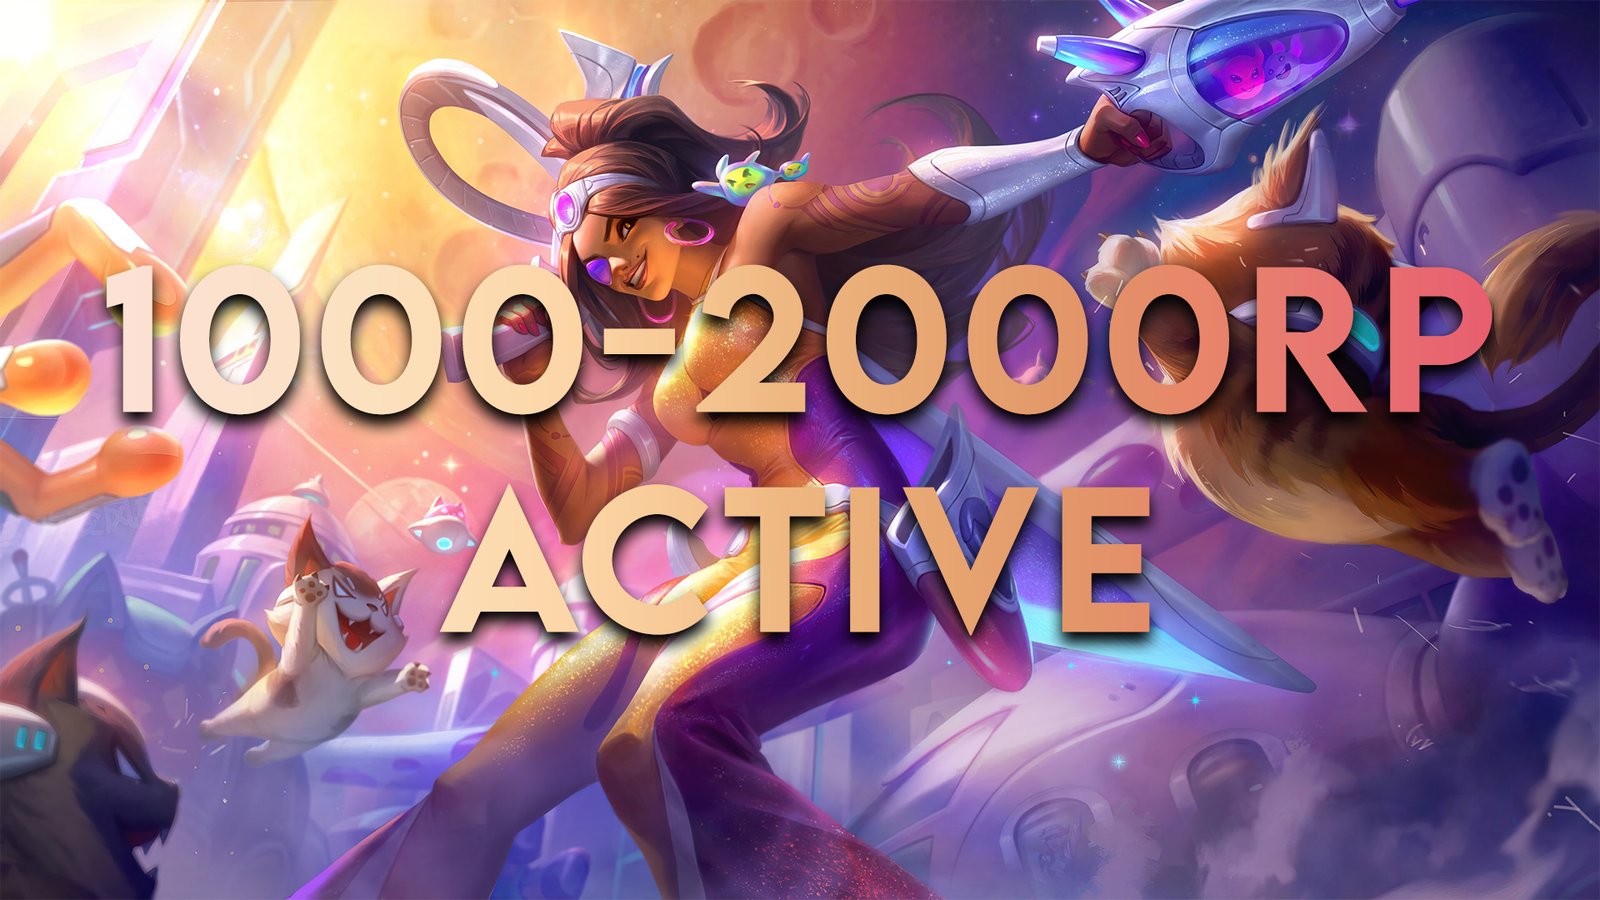 1000-2000RP Active TR